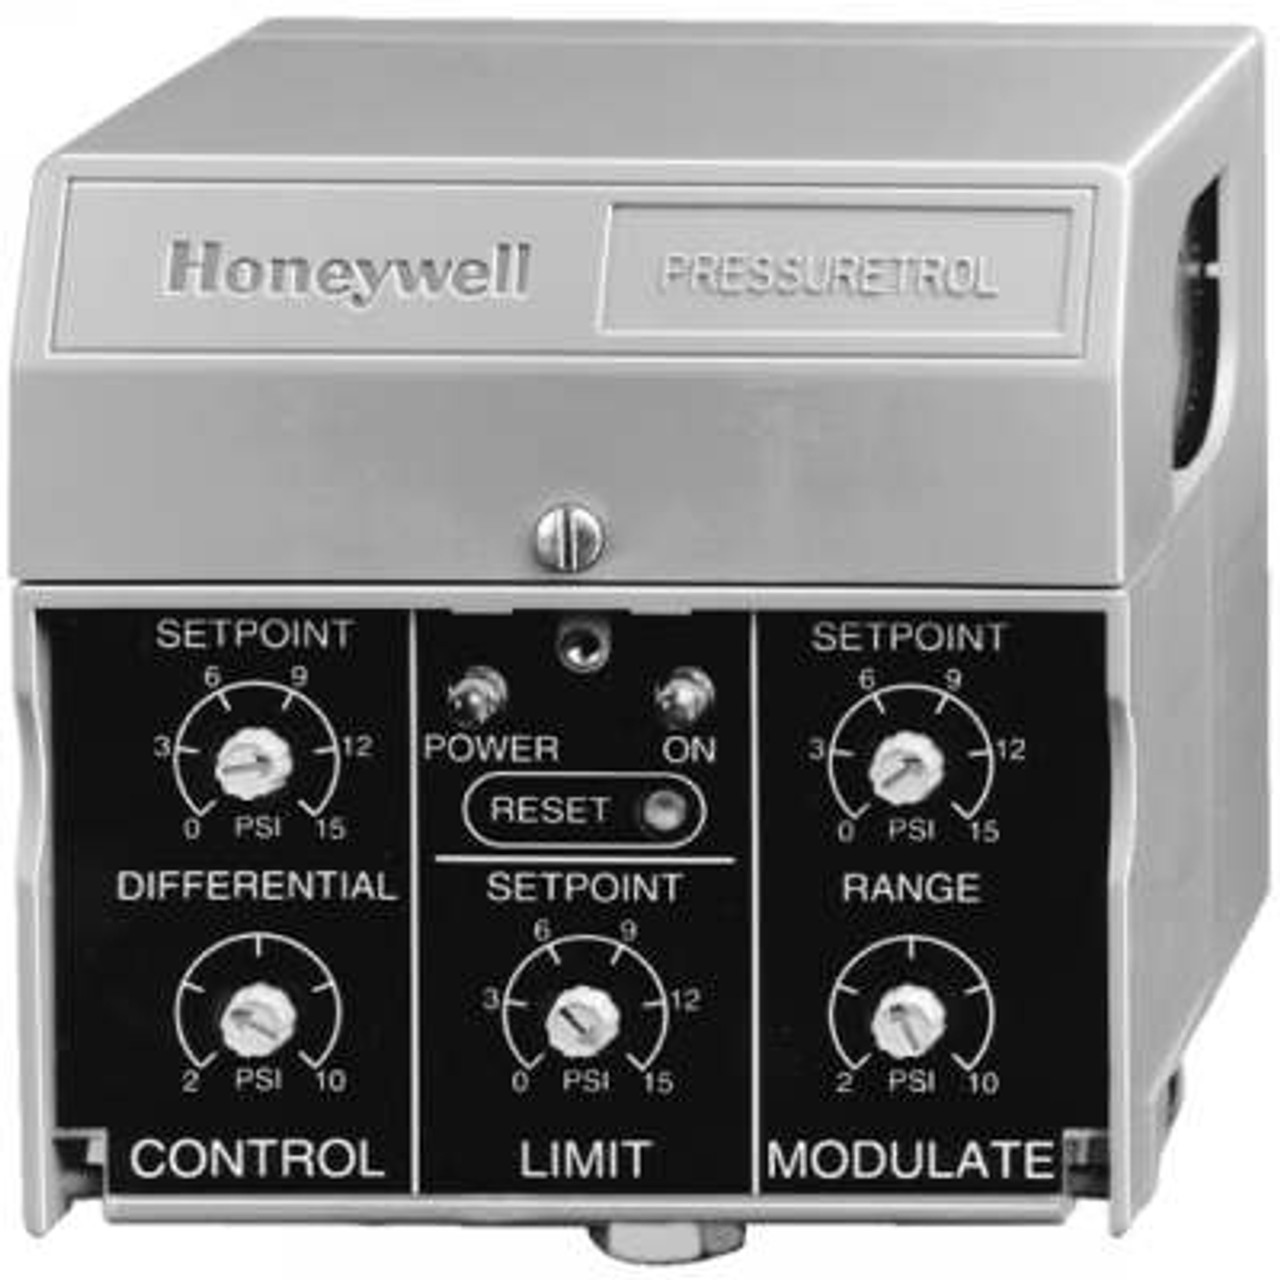 HONEYWELL P7810C1018 ON-OFF & MODULATING & LIMIT, SS PRESSURE CONTROLLER, 0-150 P